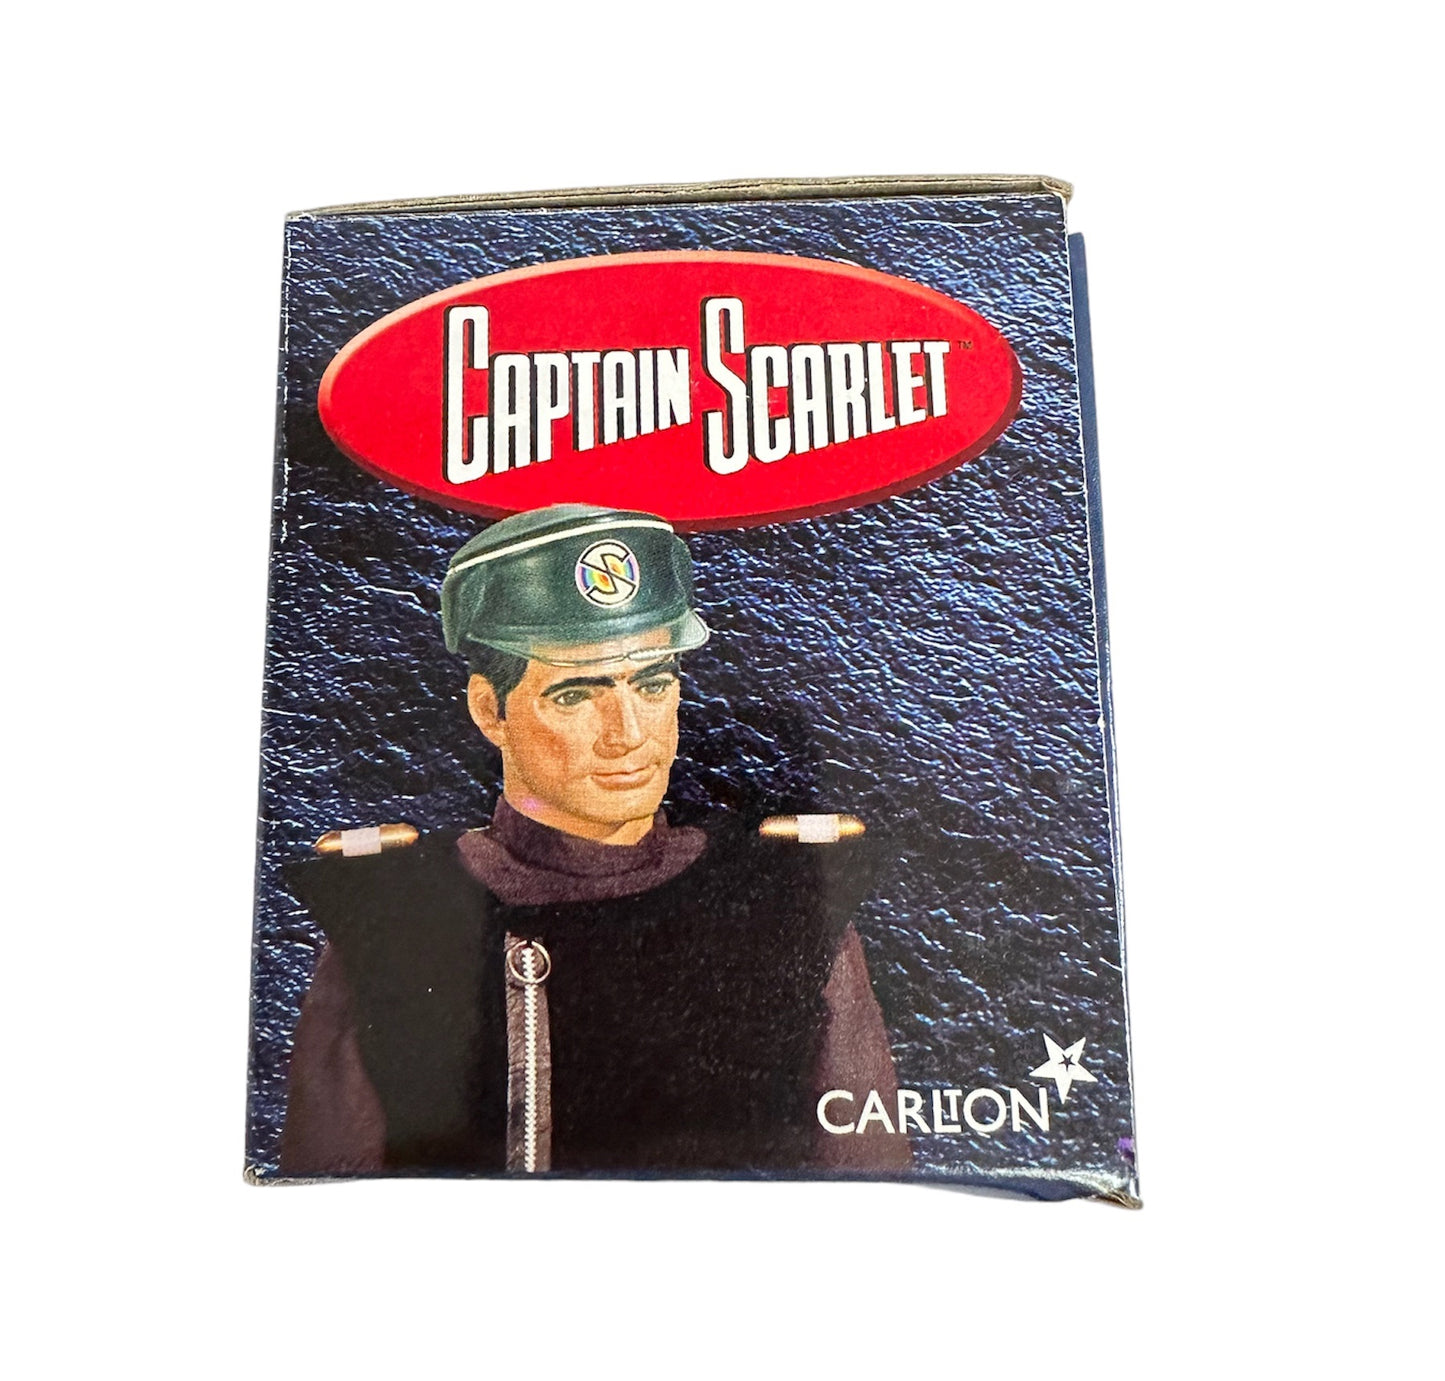 Vintage 2001 Gerry Andersons Captain Scarlet & The Mysterons Captain Black Character Mug By Vivid Imaginations - Brand New Shop Stock Room Find